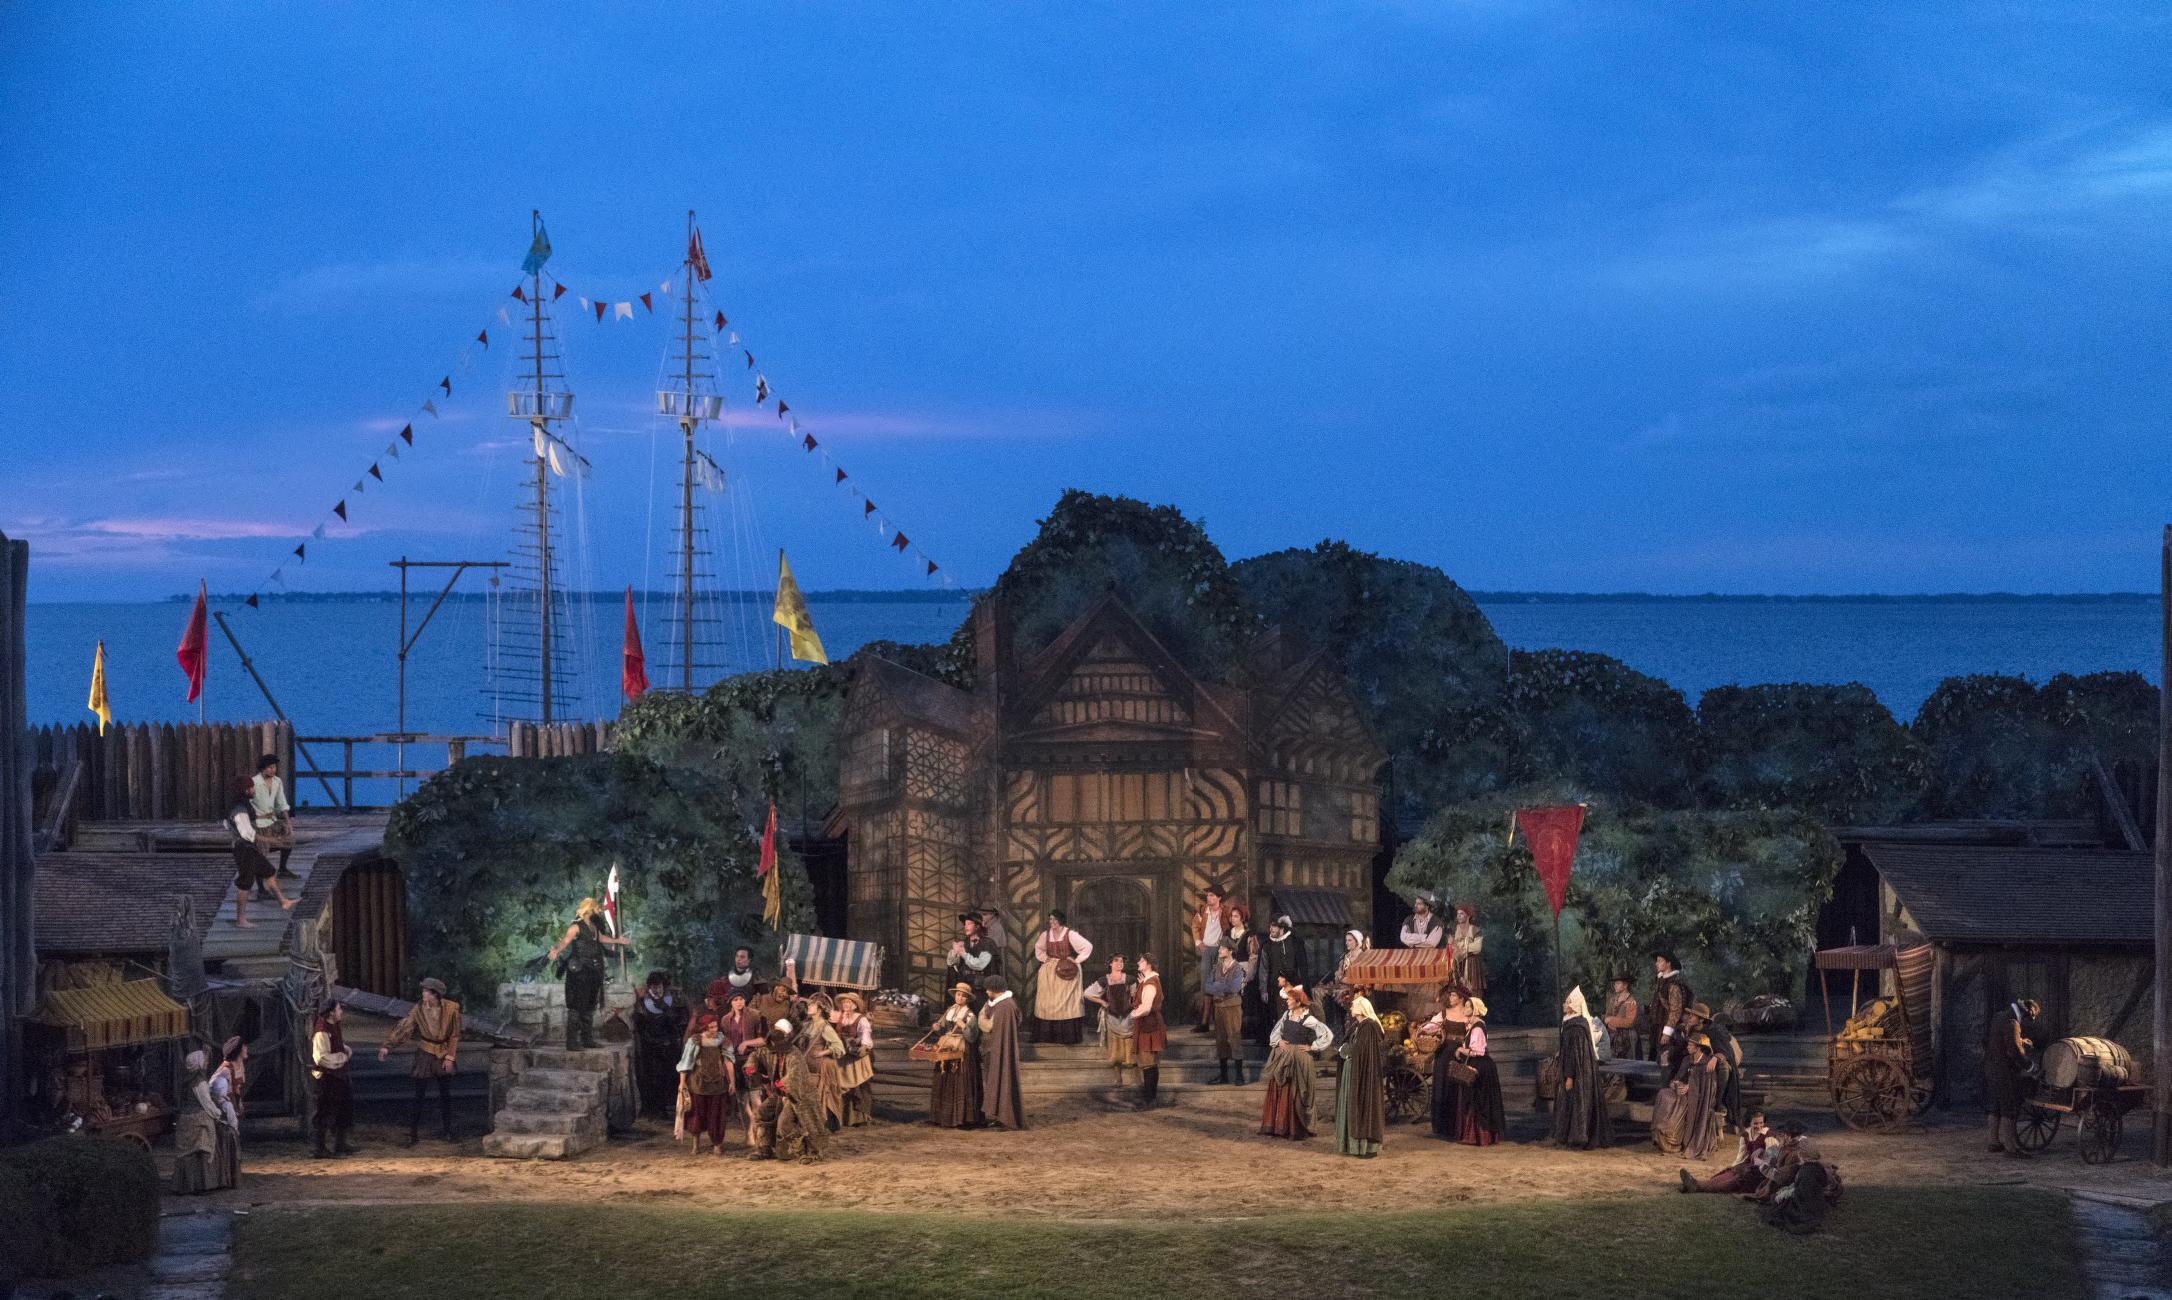 The Lost Colony outdoor drama